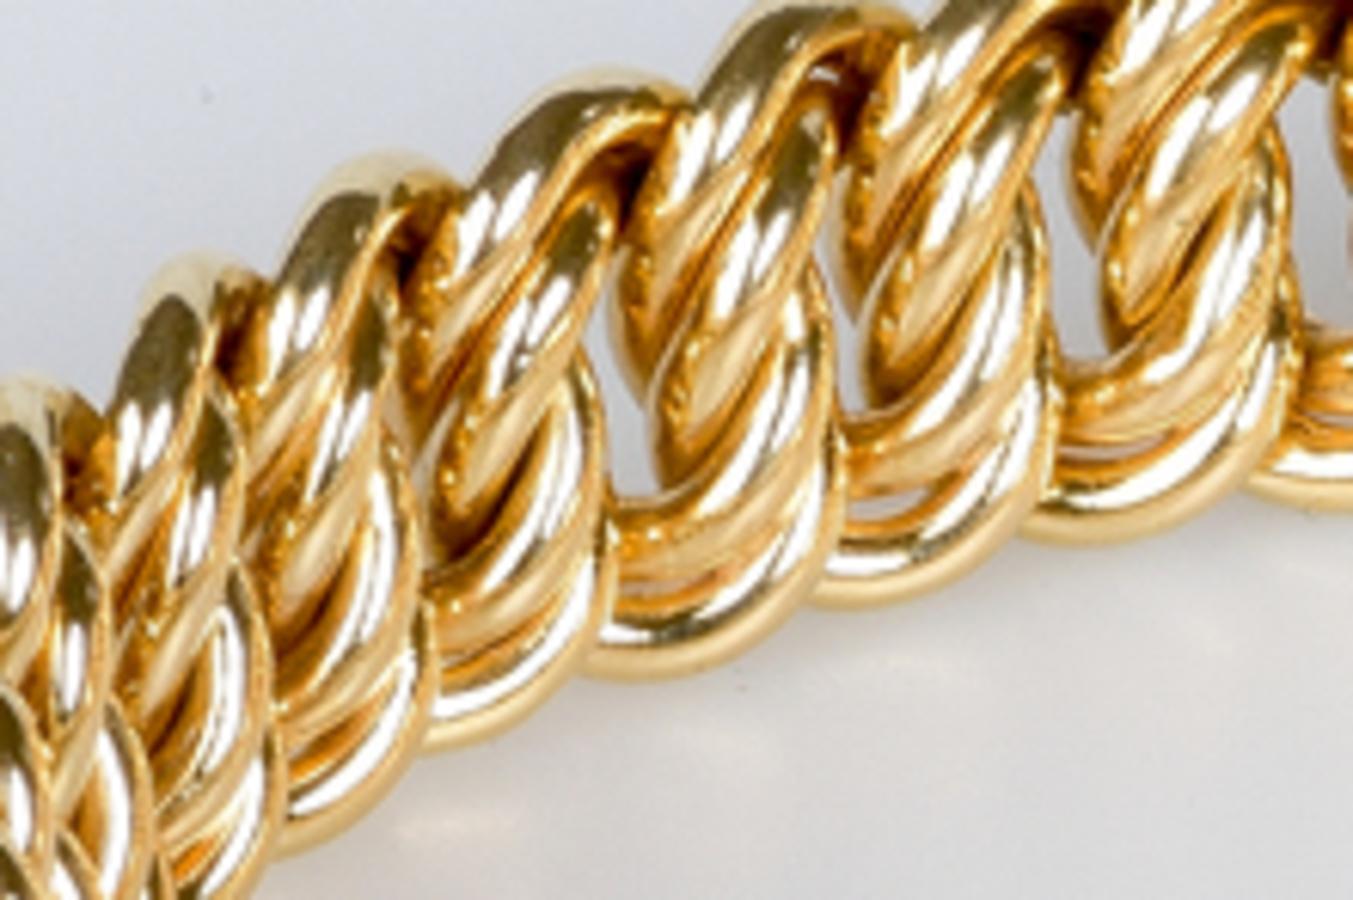 This stunning 18k yellow gold bracelet embodies the essence of timeless elegance. Its American mesh, made of shiny gold links and finely woven, creates a luxurious and delicate texture that attracts the eye. Each link is carefully designed to